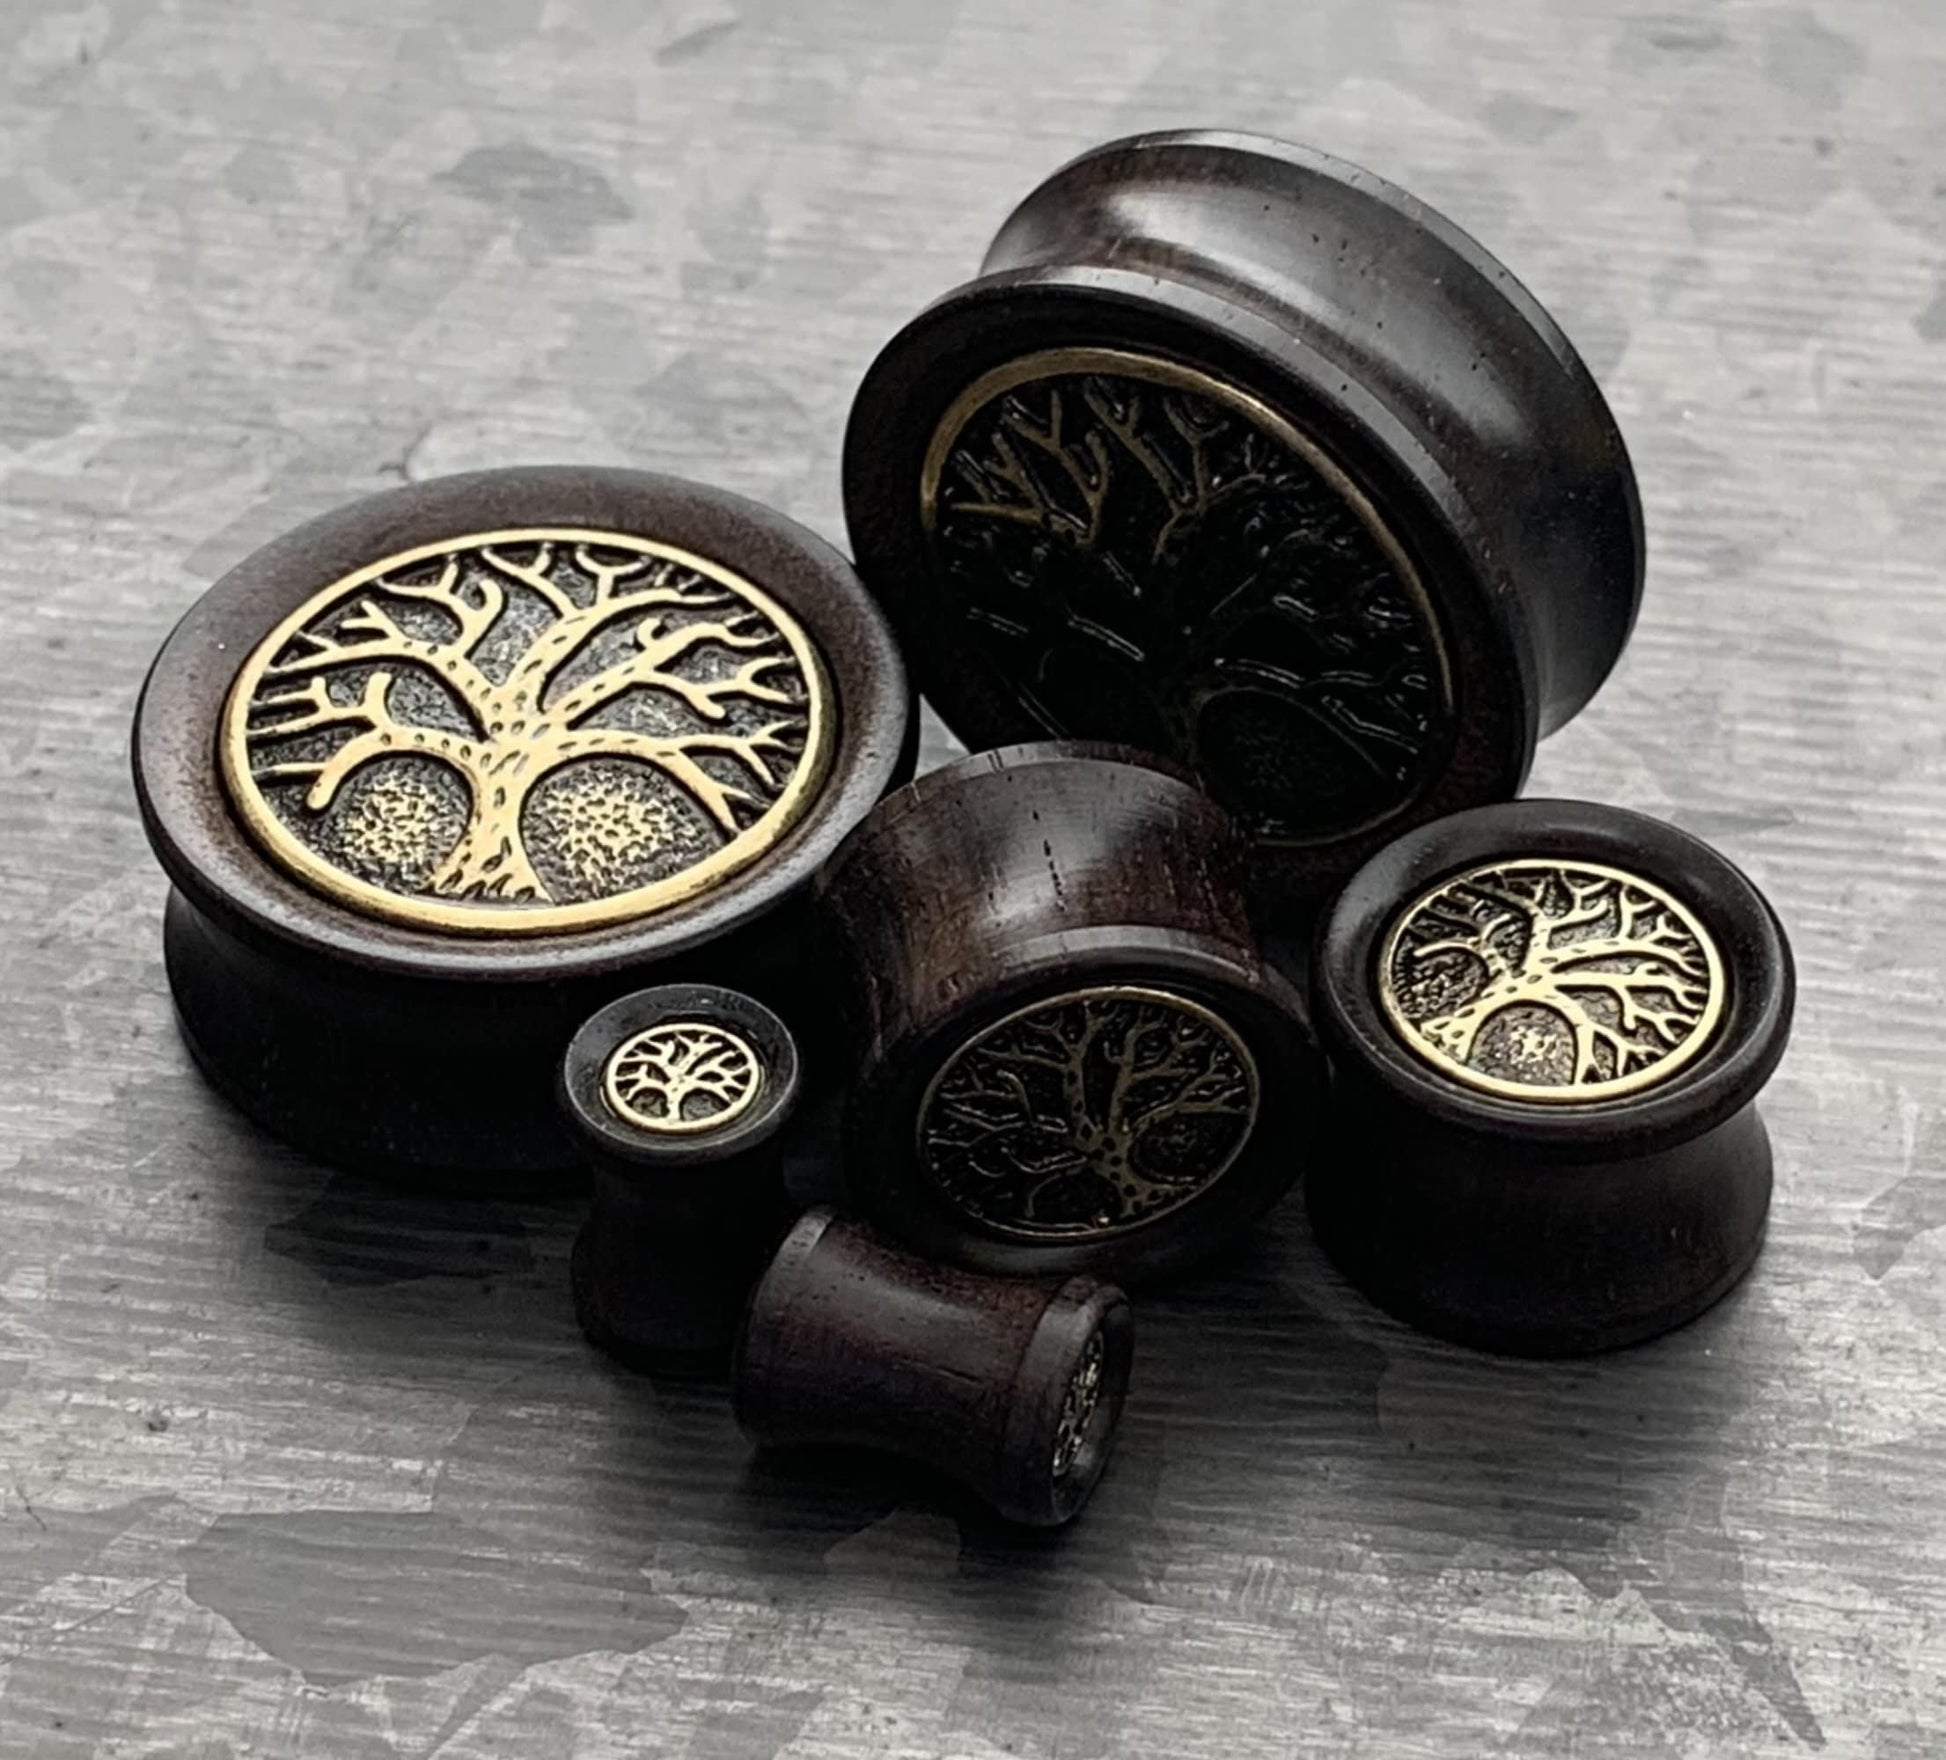 PAIR of Beautiful Organic Ebony Wood Plugs with Tree of Life Top Saddle Plugs - Gauges 2g (6mm) up to 1" (25mm) available!